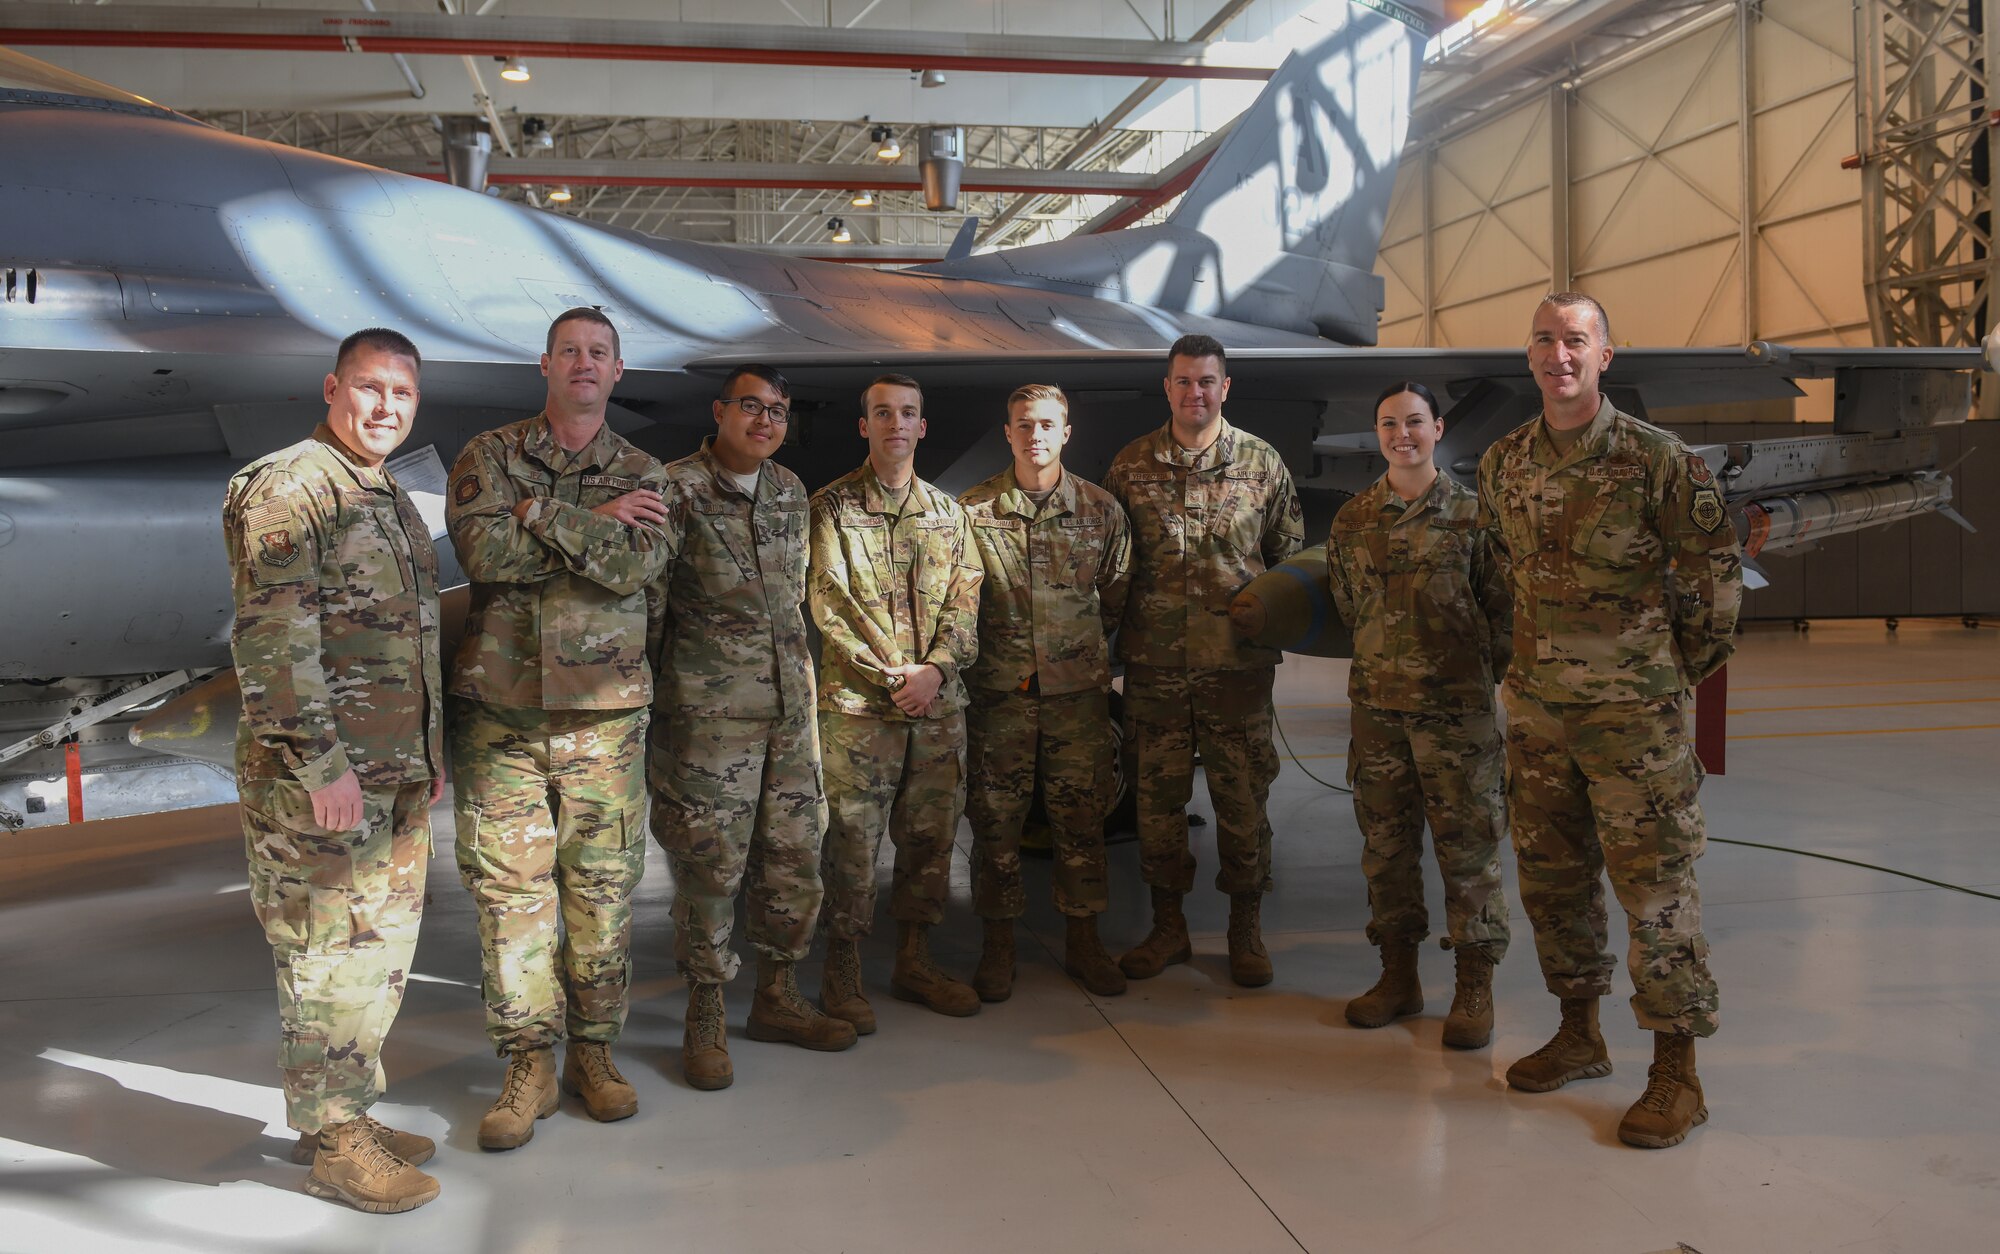 U.S Airmen from the 31st Munition Squadron and leadership pose for a photo at Aviano Air Base, Italy, Oct. 31, 2019. The “Wing it” team from the Rapid Aircraft Generation and Employment competition had a higher overall score and will have their names etched on plaques, which will be added to the 31st MUNS heritage. (U.S. Air Force photo by Airman 1st Class Ericka A. Woolever).